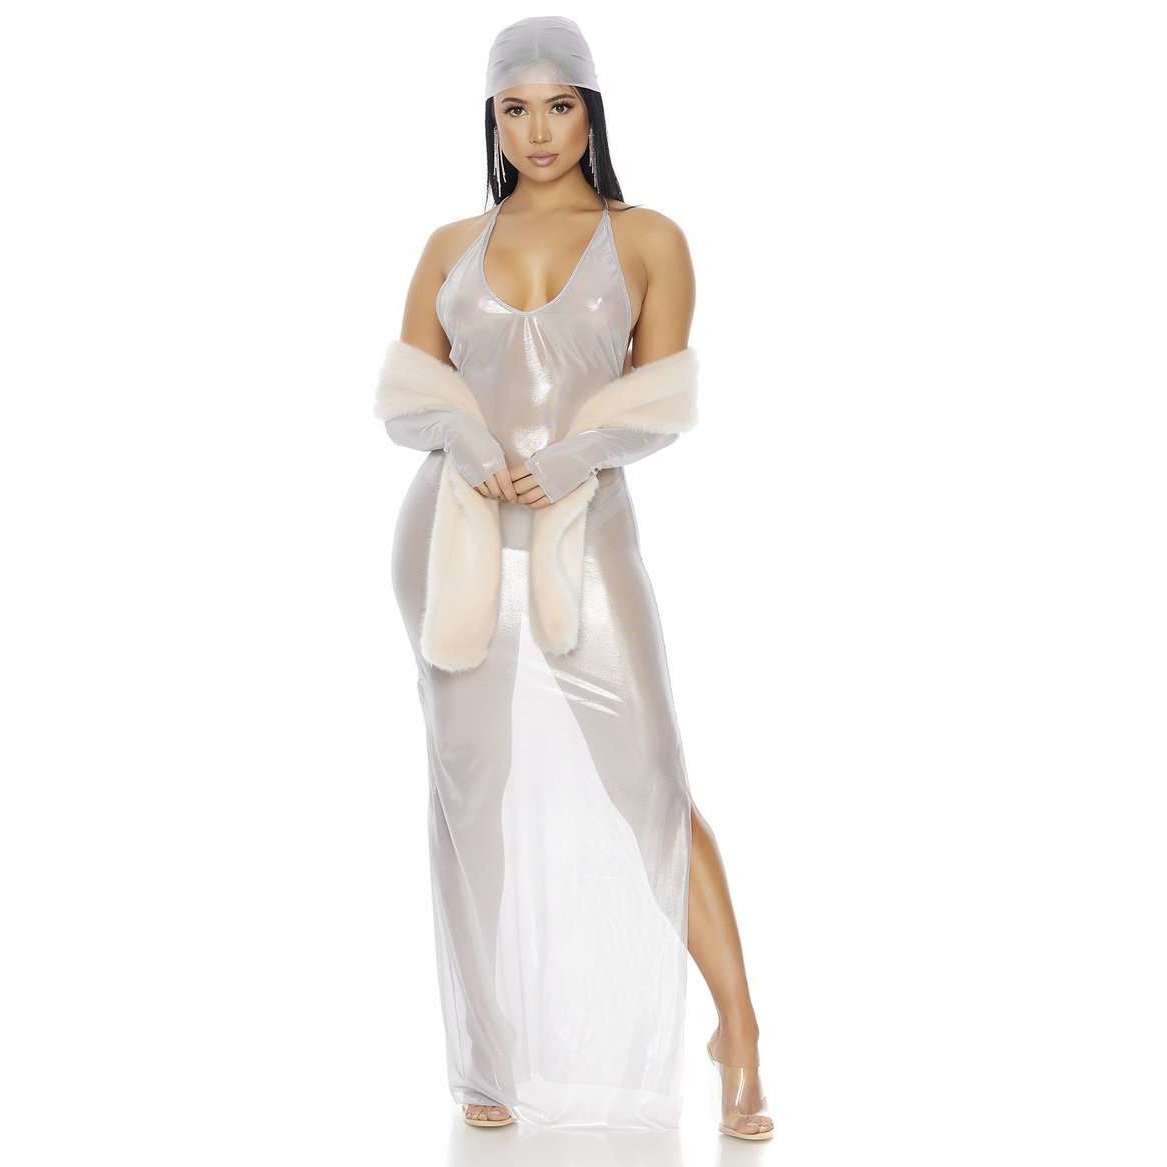 Unapologetic Sheer Sexy Pop Star Adult Costume